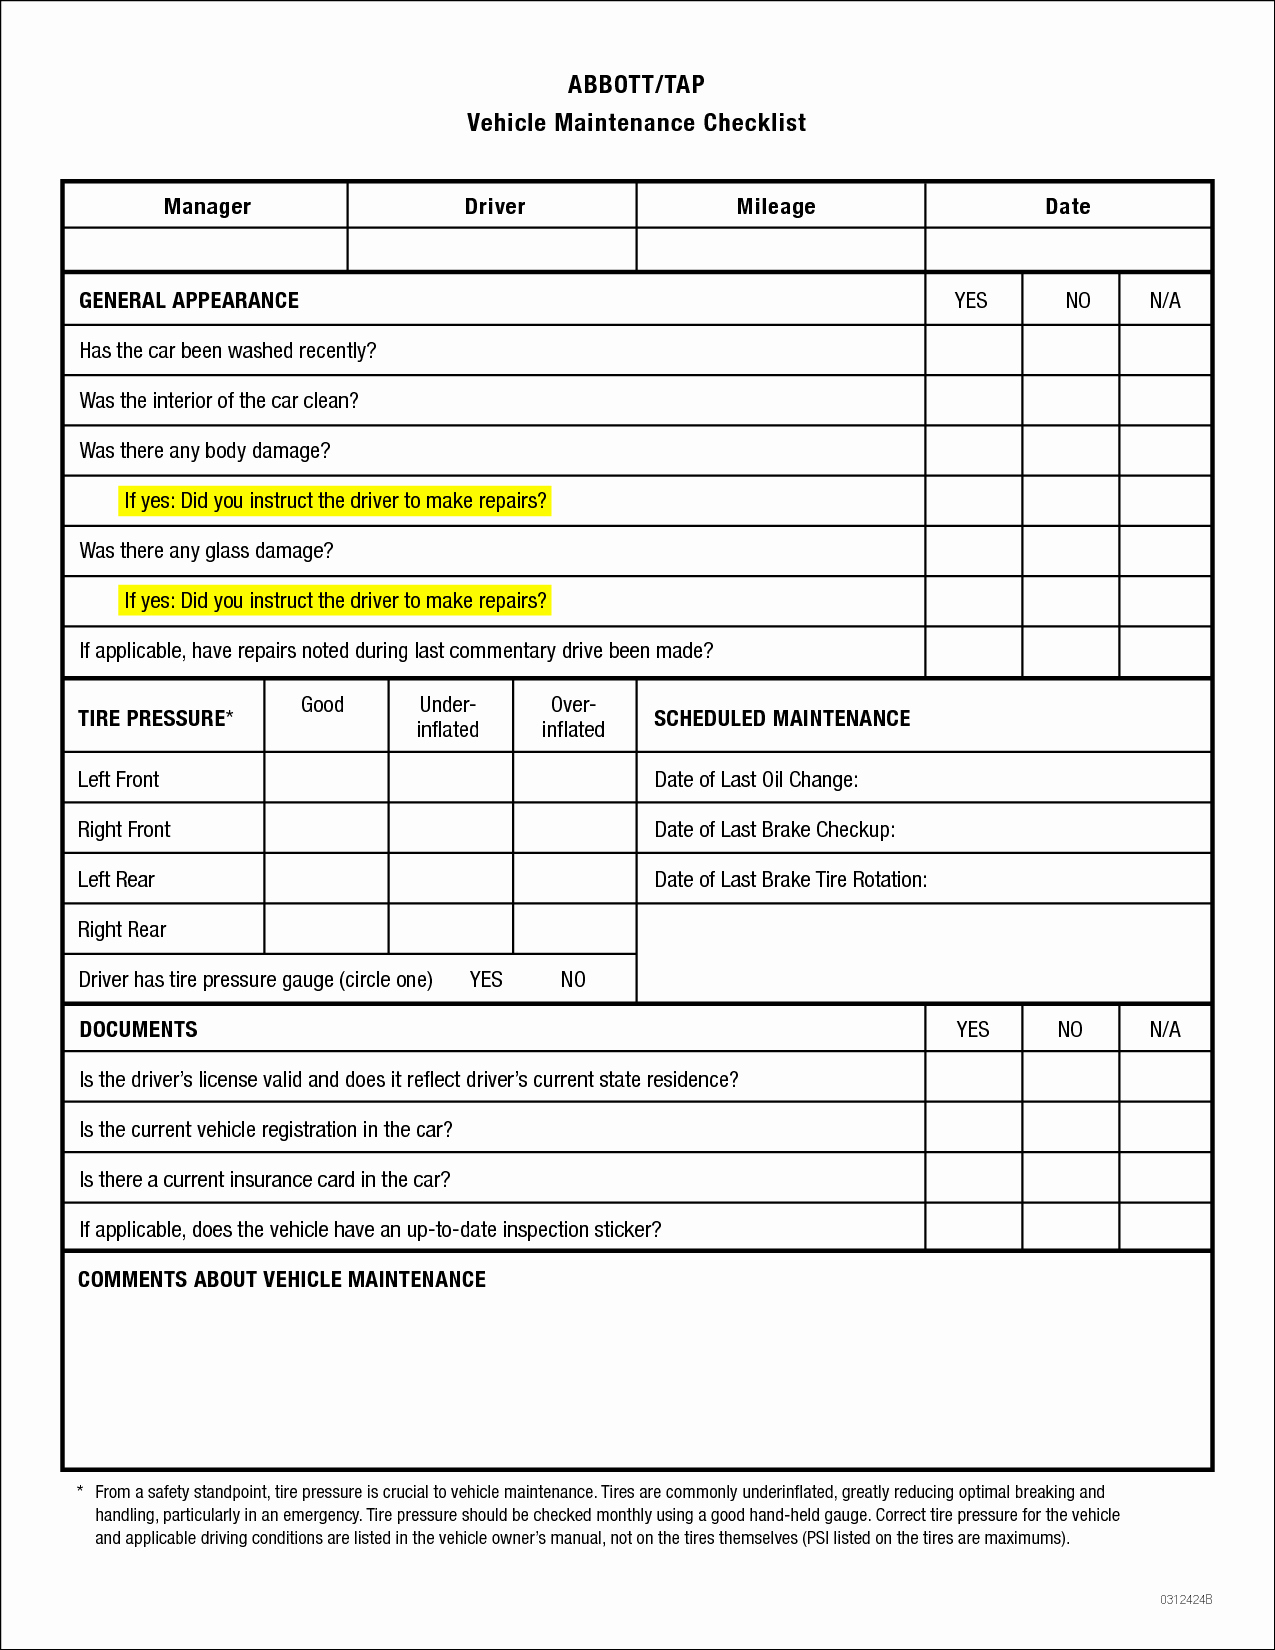 Vehicle Maintenance Checklist Template Want A Smart Way to